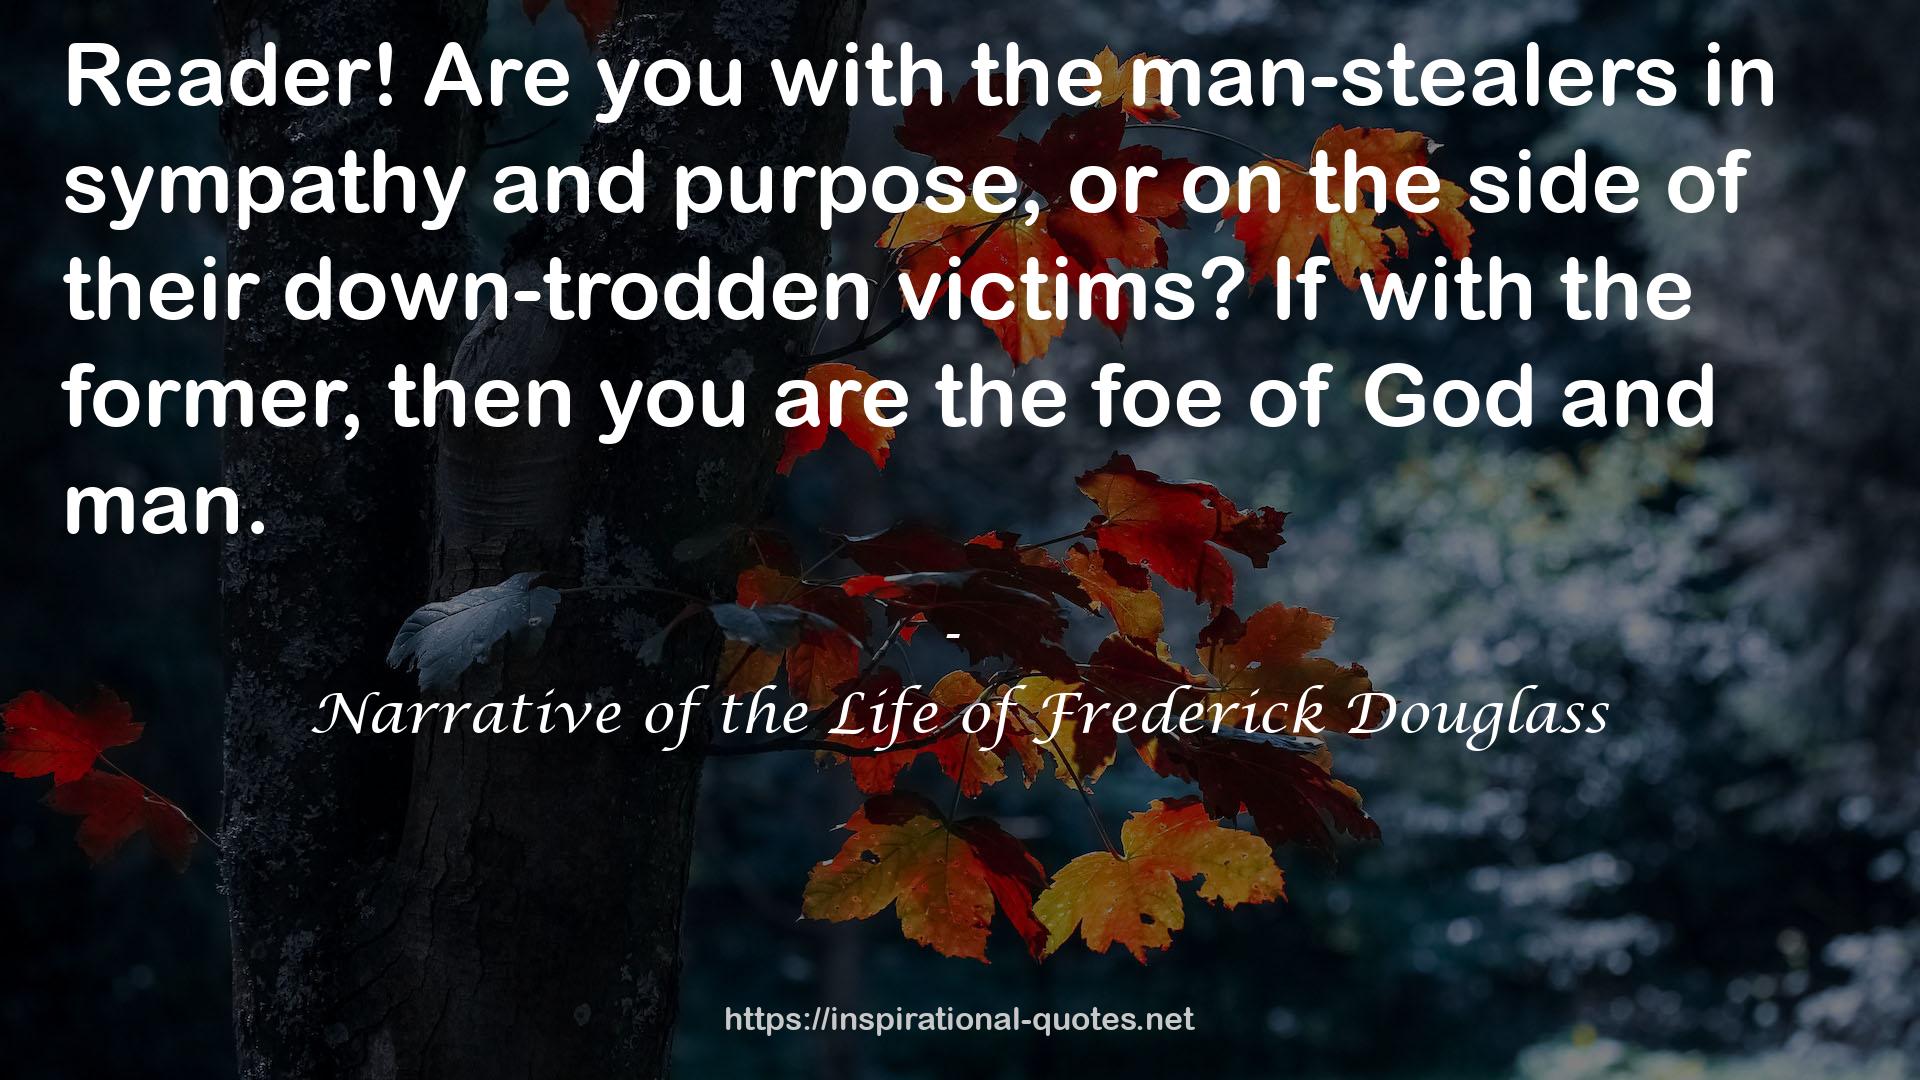 Narrative of the Life of Frederick Douglass QUOTES